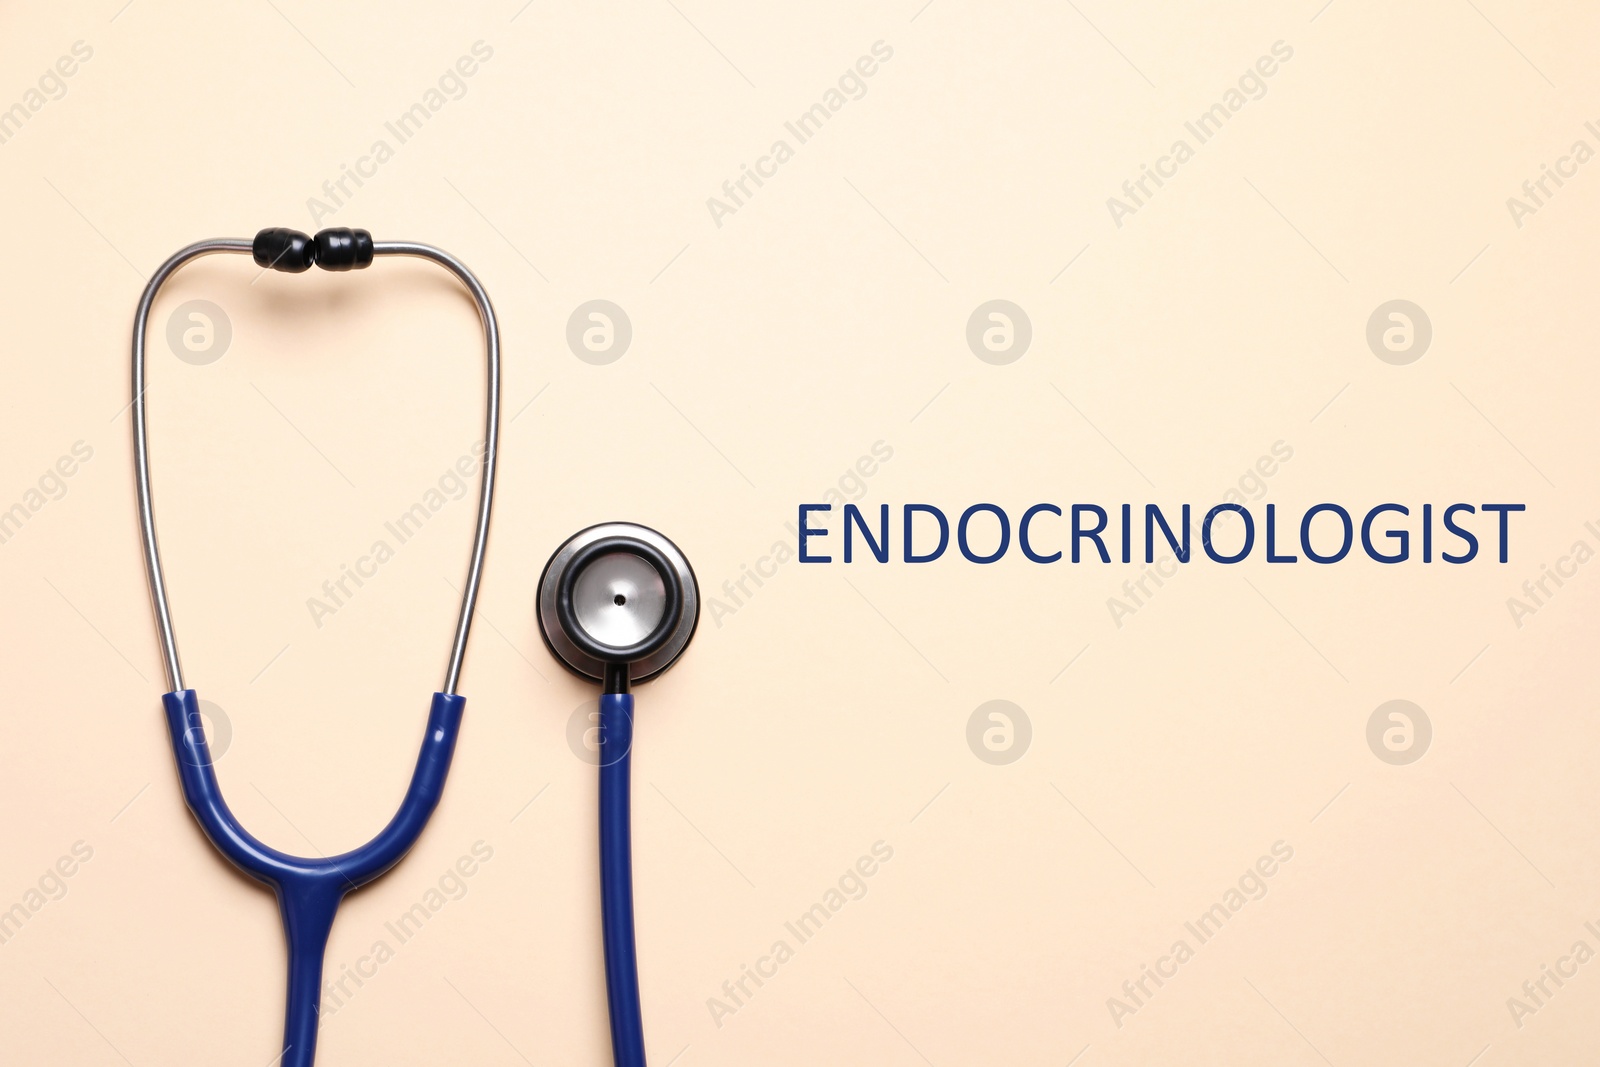 Image of Endocrinologist. Stethoscope on beige background, top view